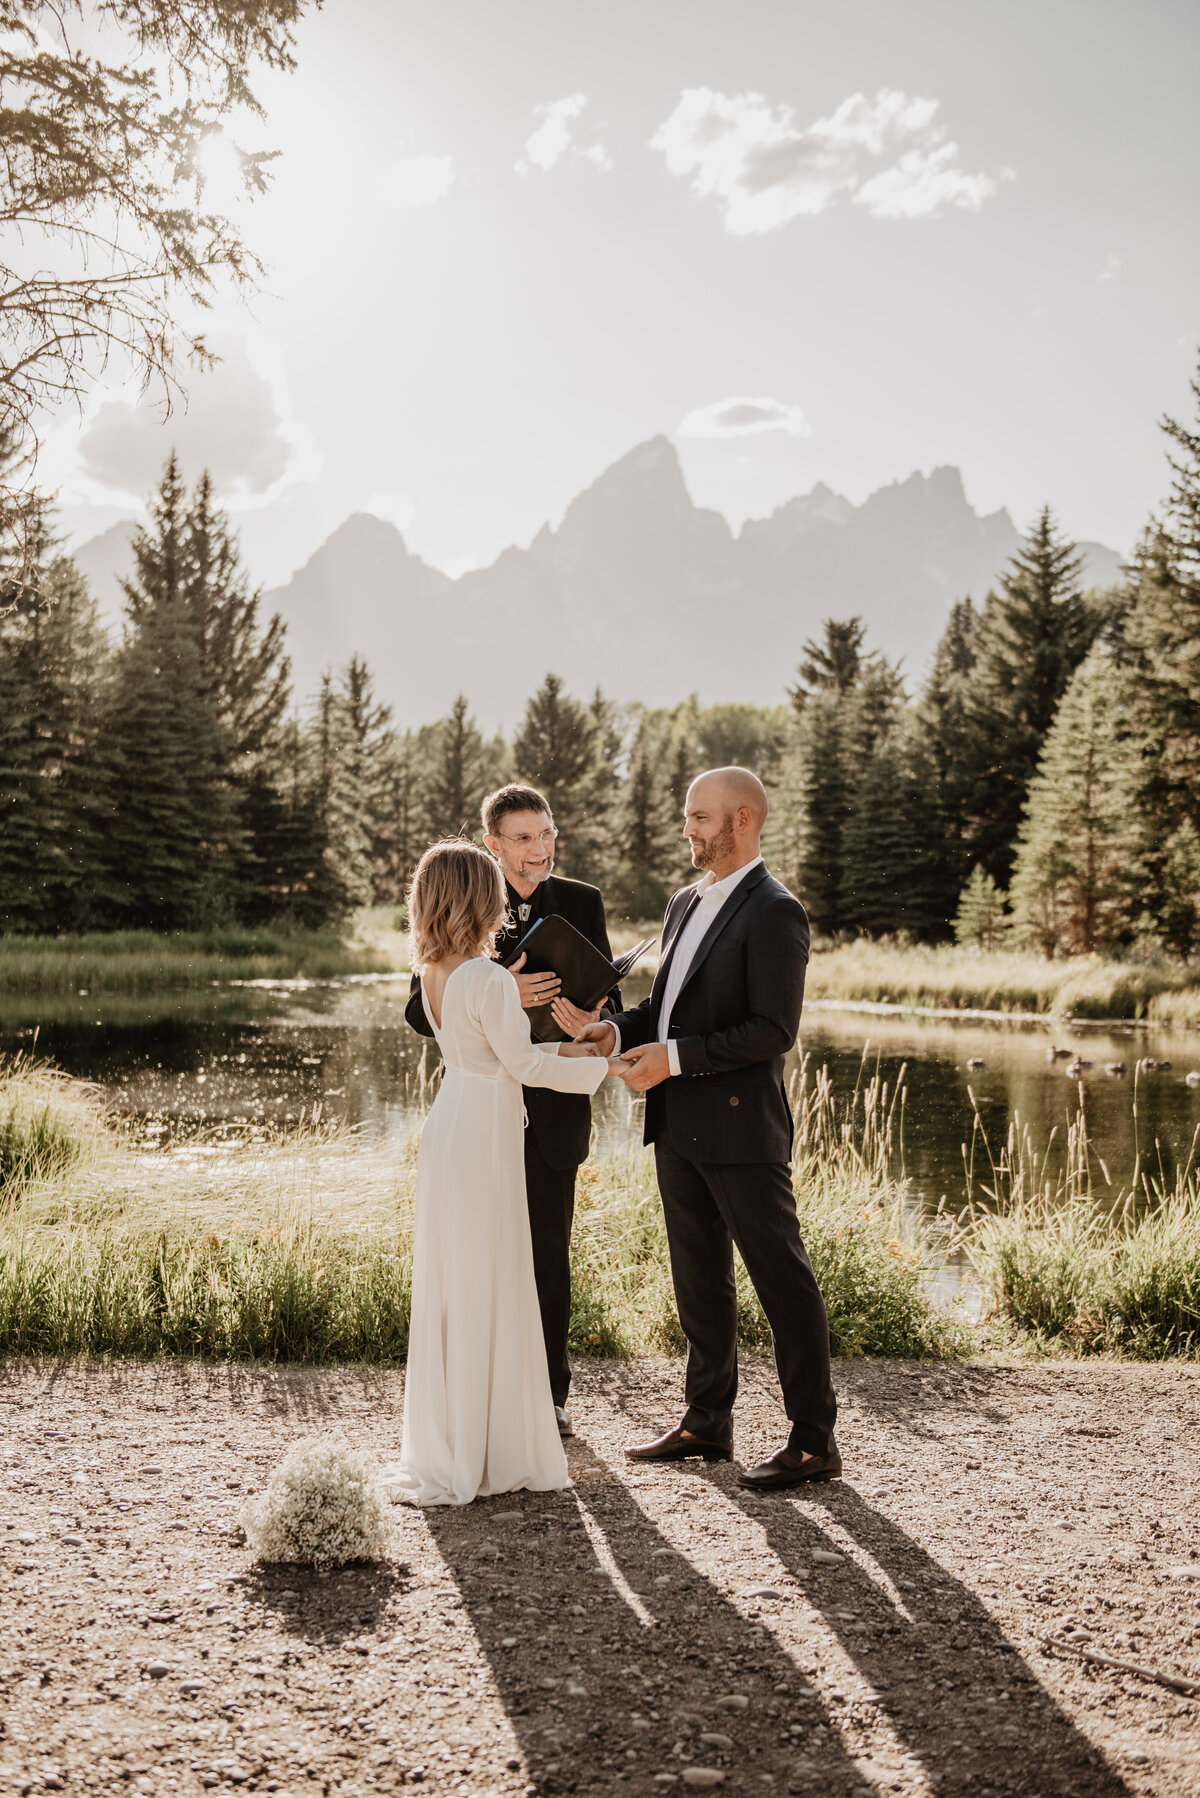 Bride and groom holding hands next to a lake at the Tetons for their ceremony